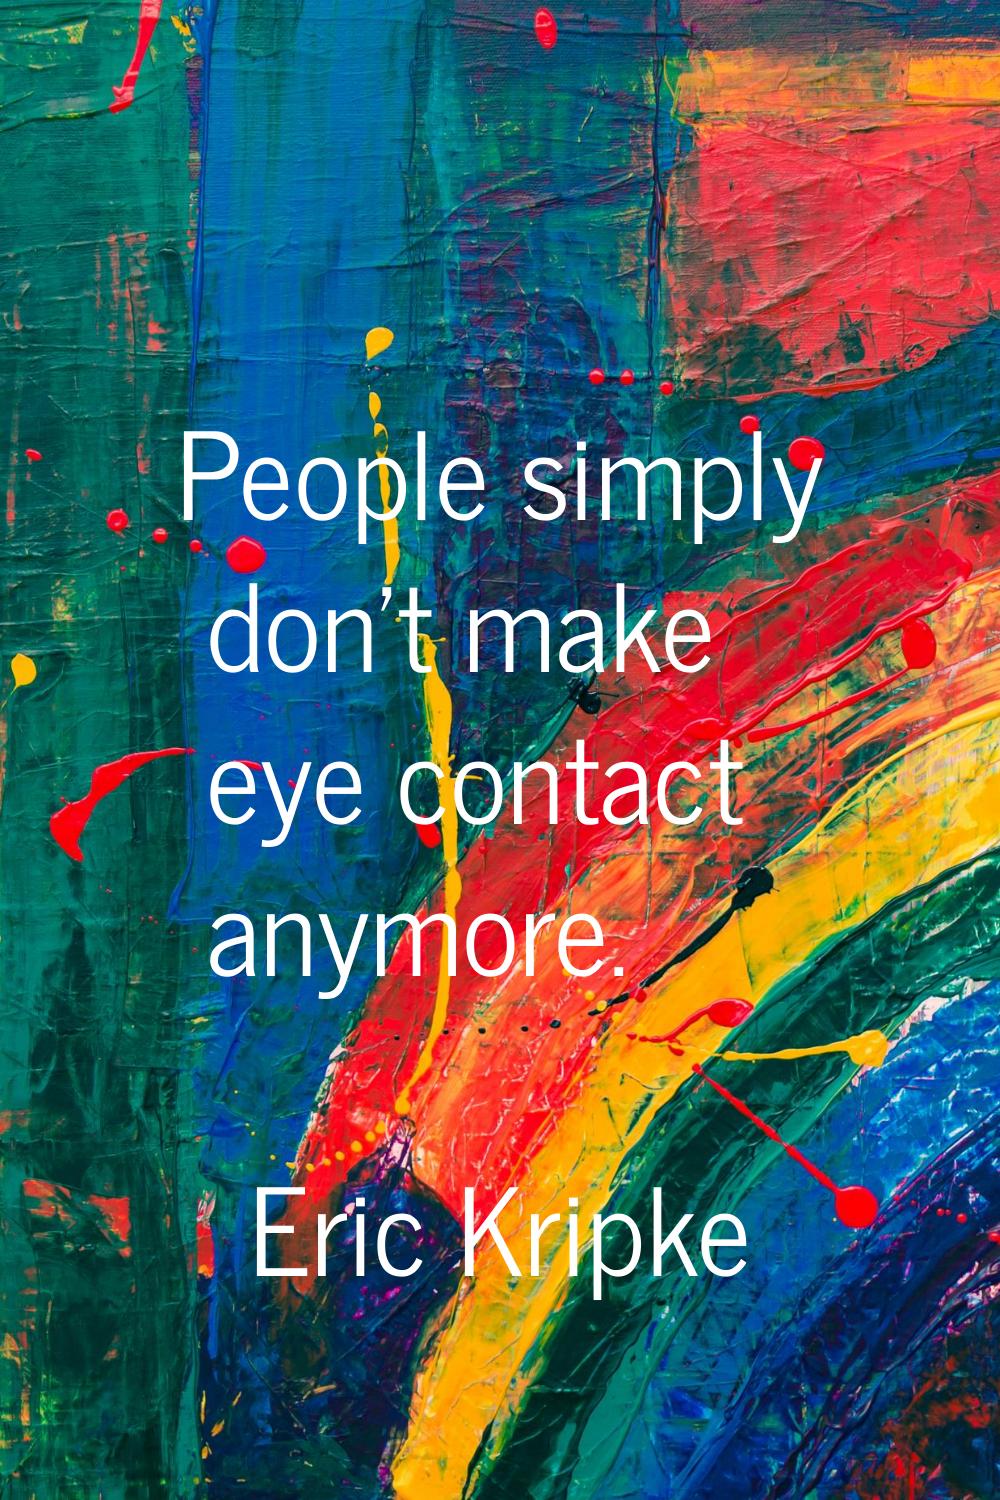 People simply don't make eye contact anymore.